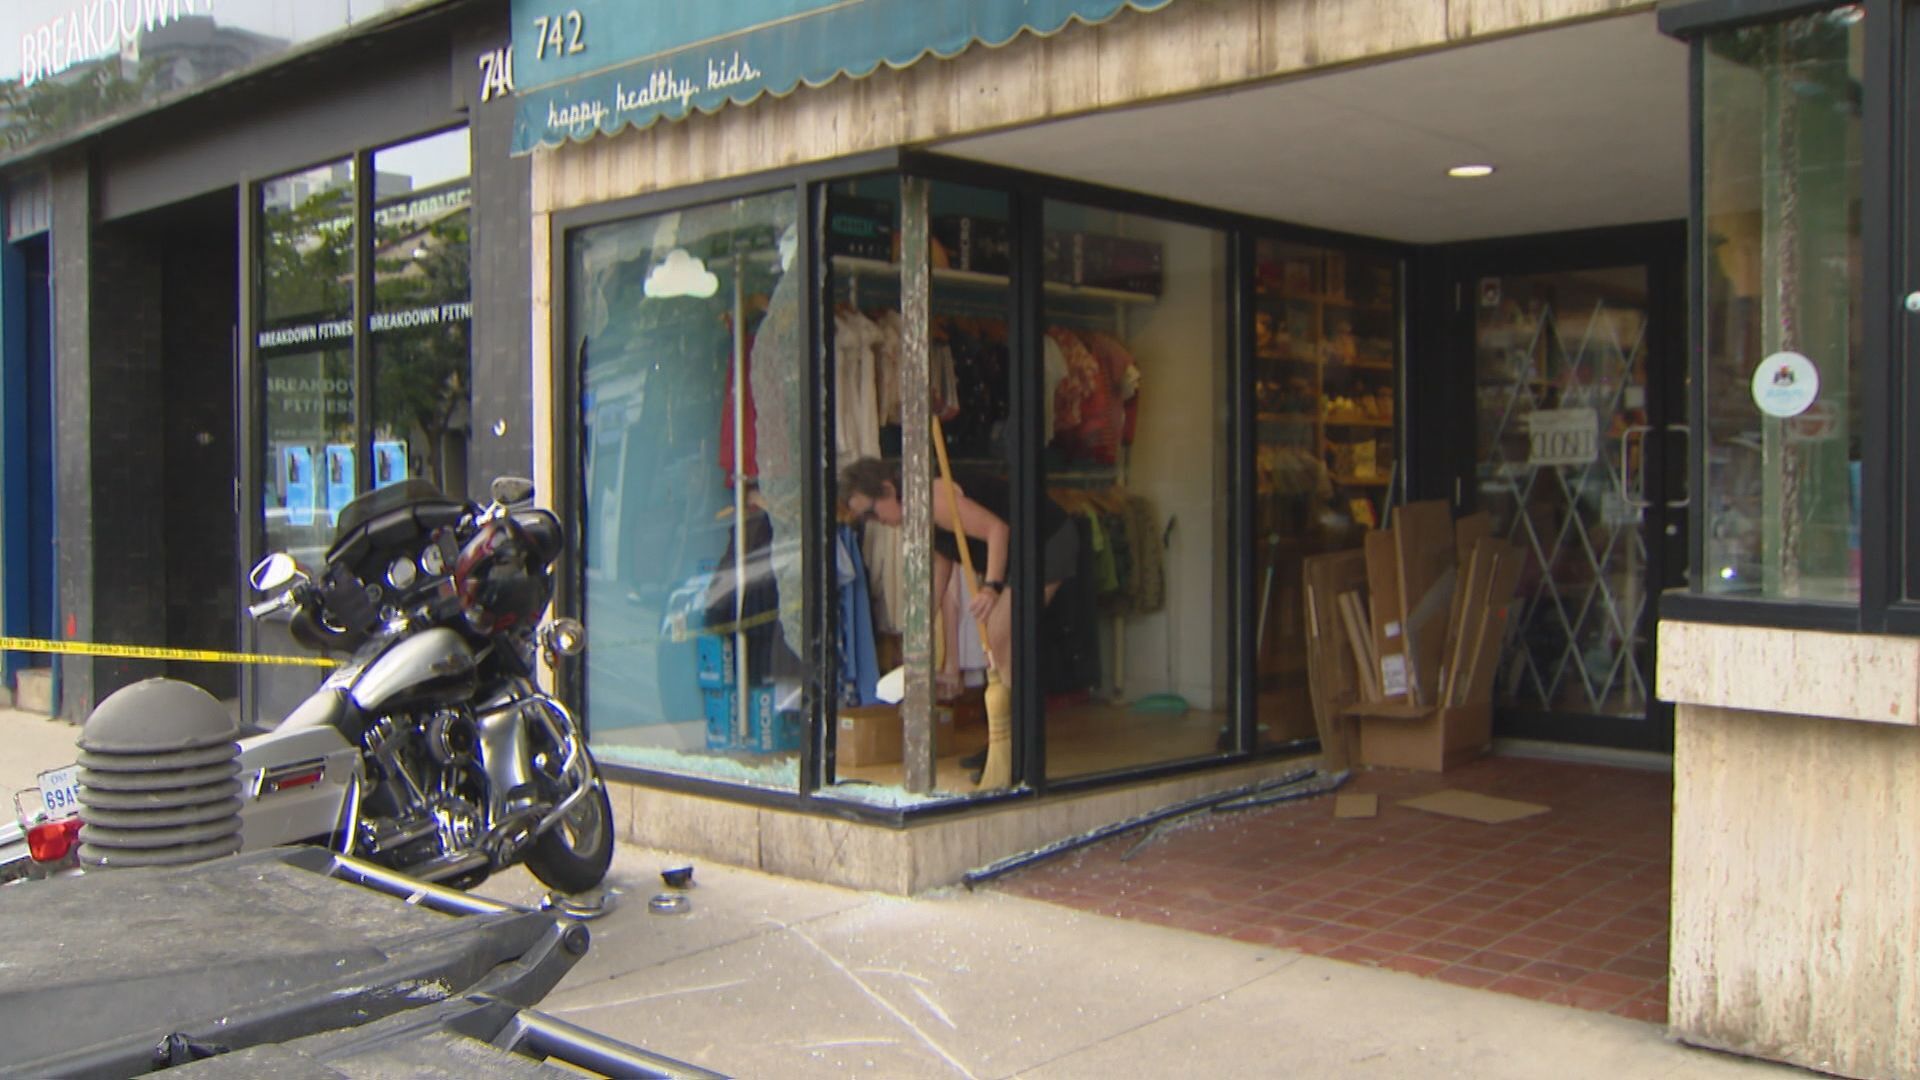 Locals rally around store after motorcycle crashes into the building